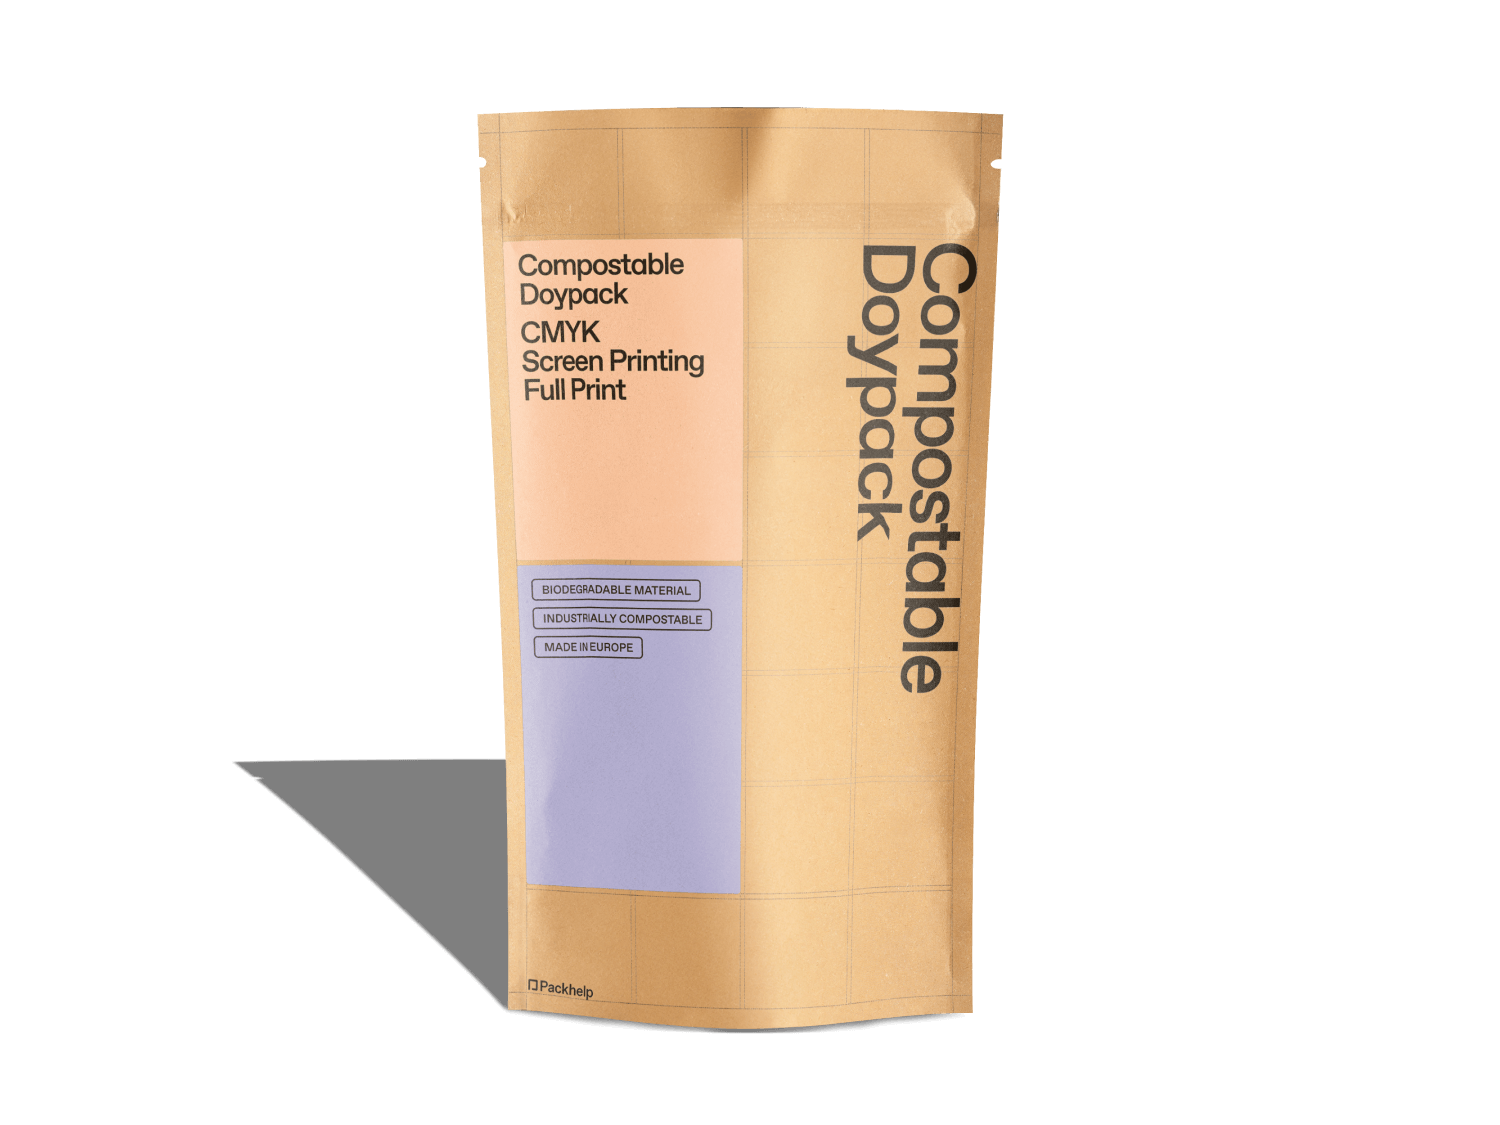 Doypack compostable